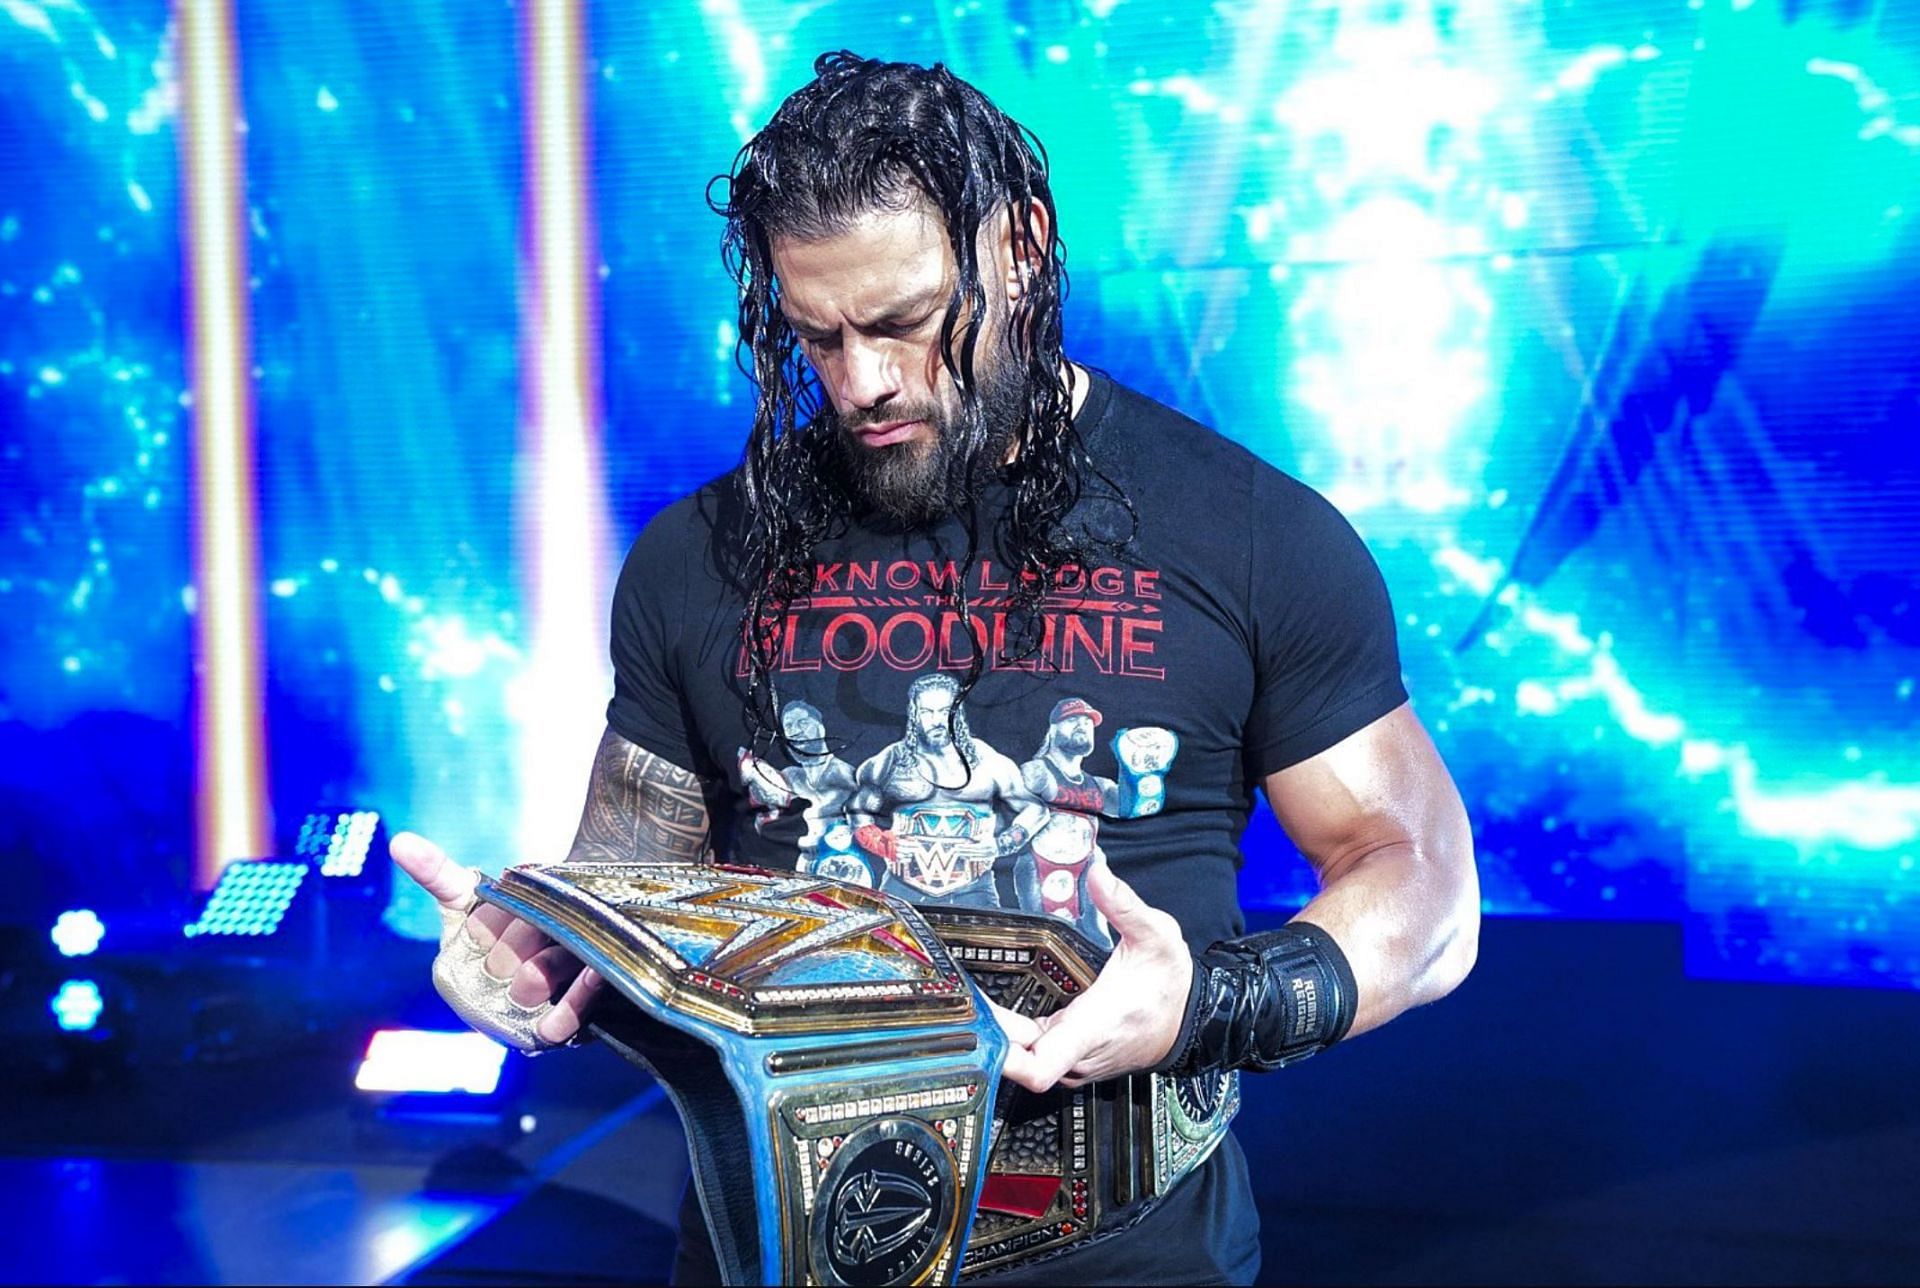 Roman Reigns has held the Universal Championship for over 720 days